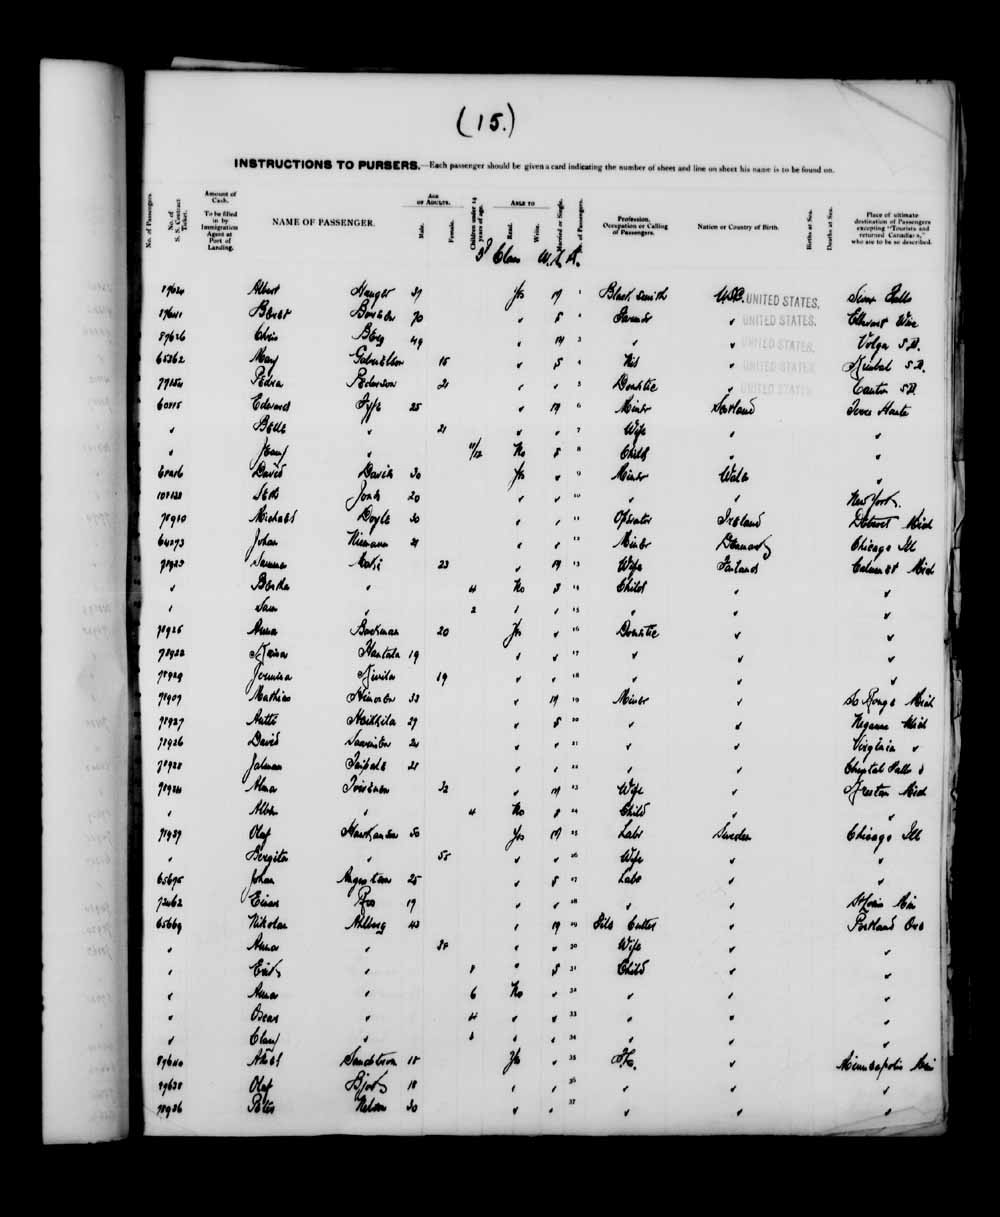 Digitized page of Quebec Passenger Lists for Image No.: e003591265